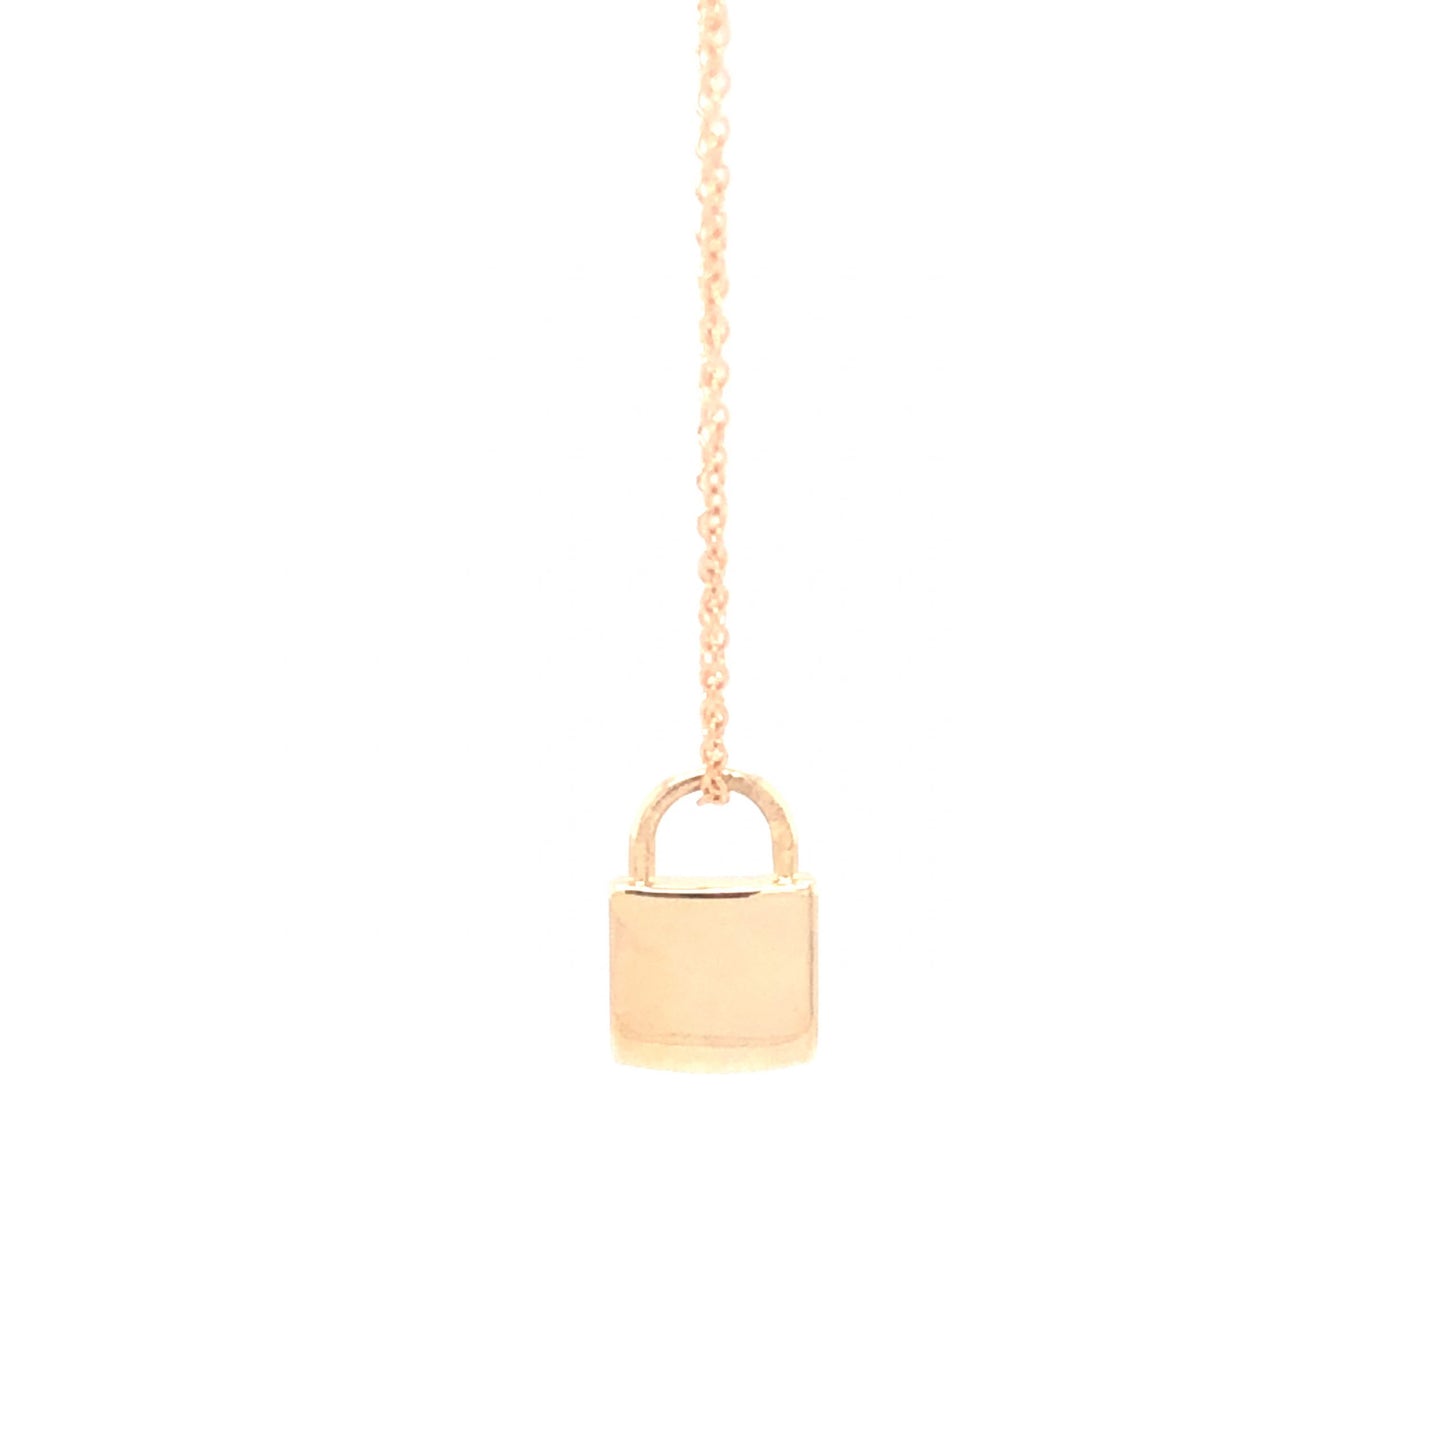 18 inch Lock Pendant Necklace in 14k Yellow Gold